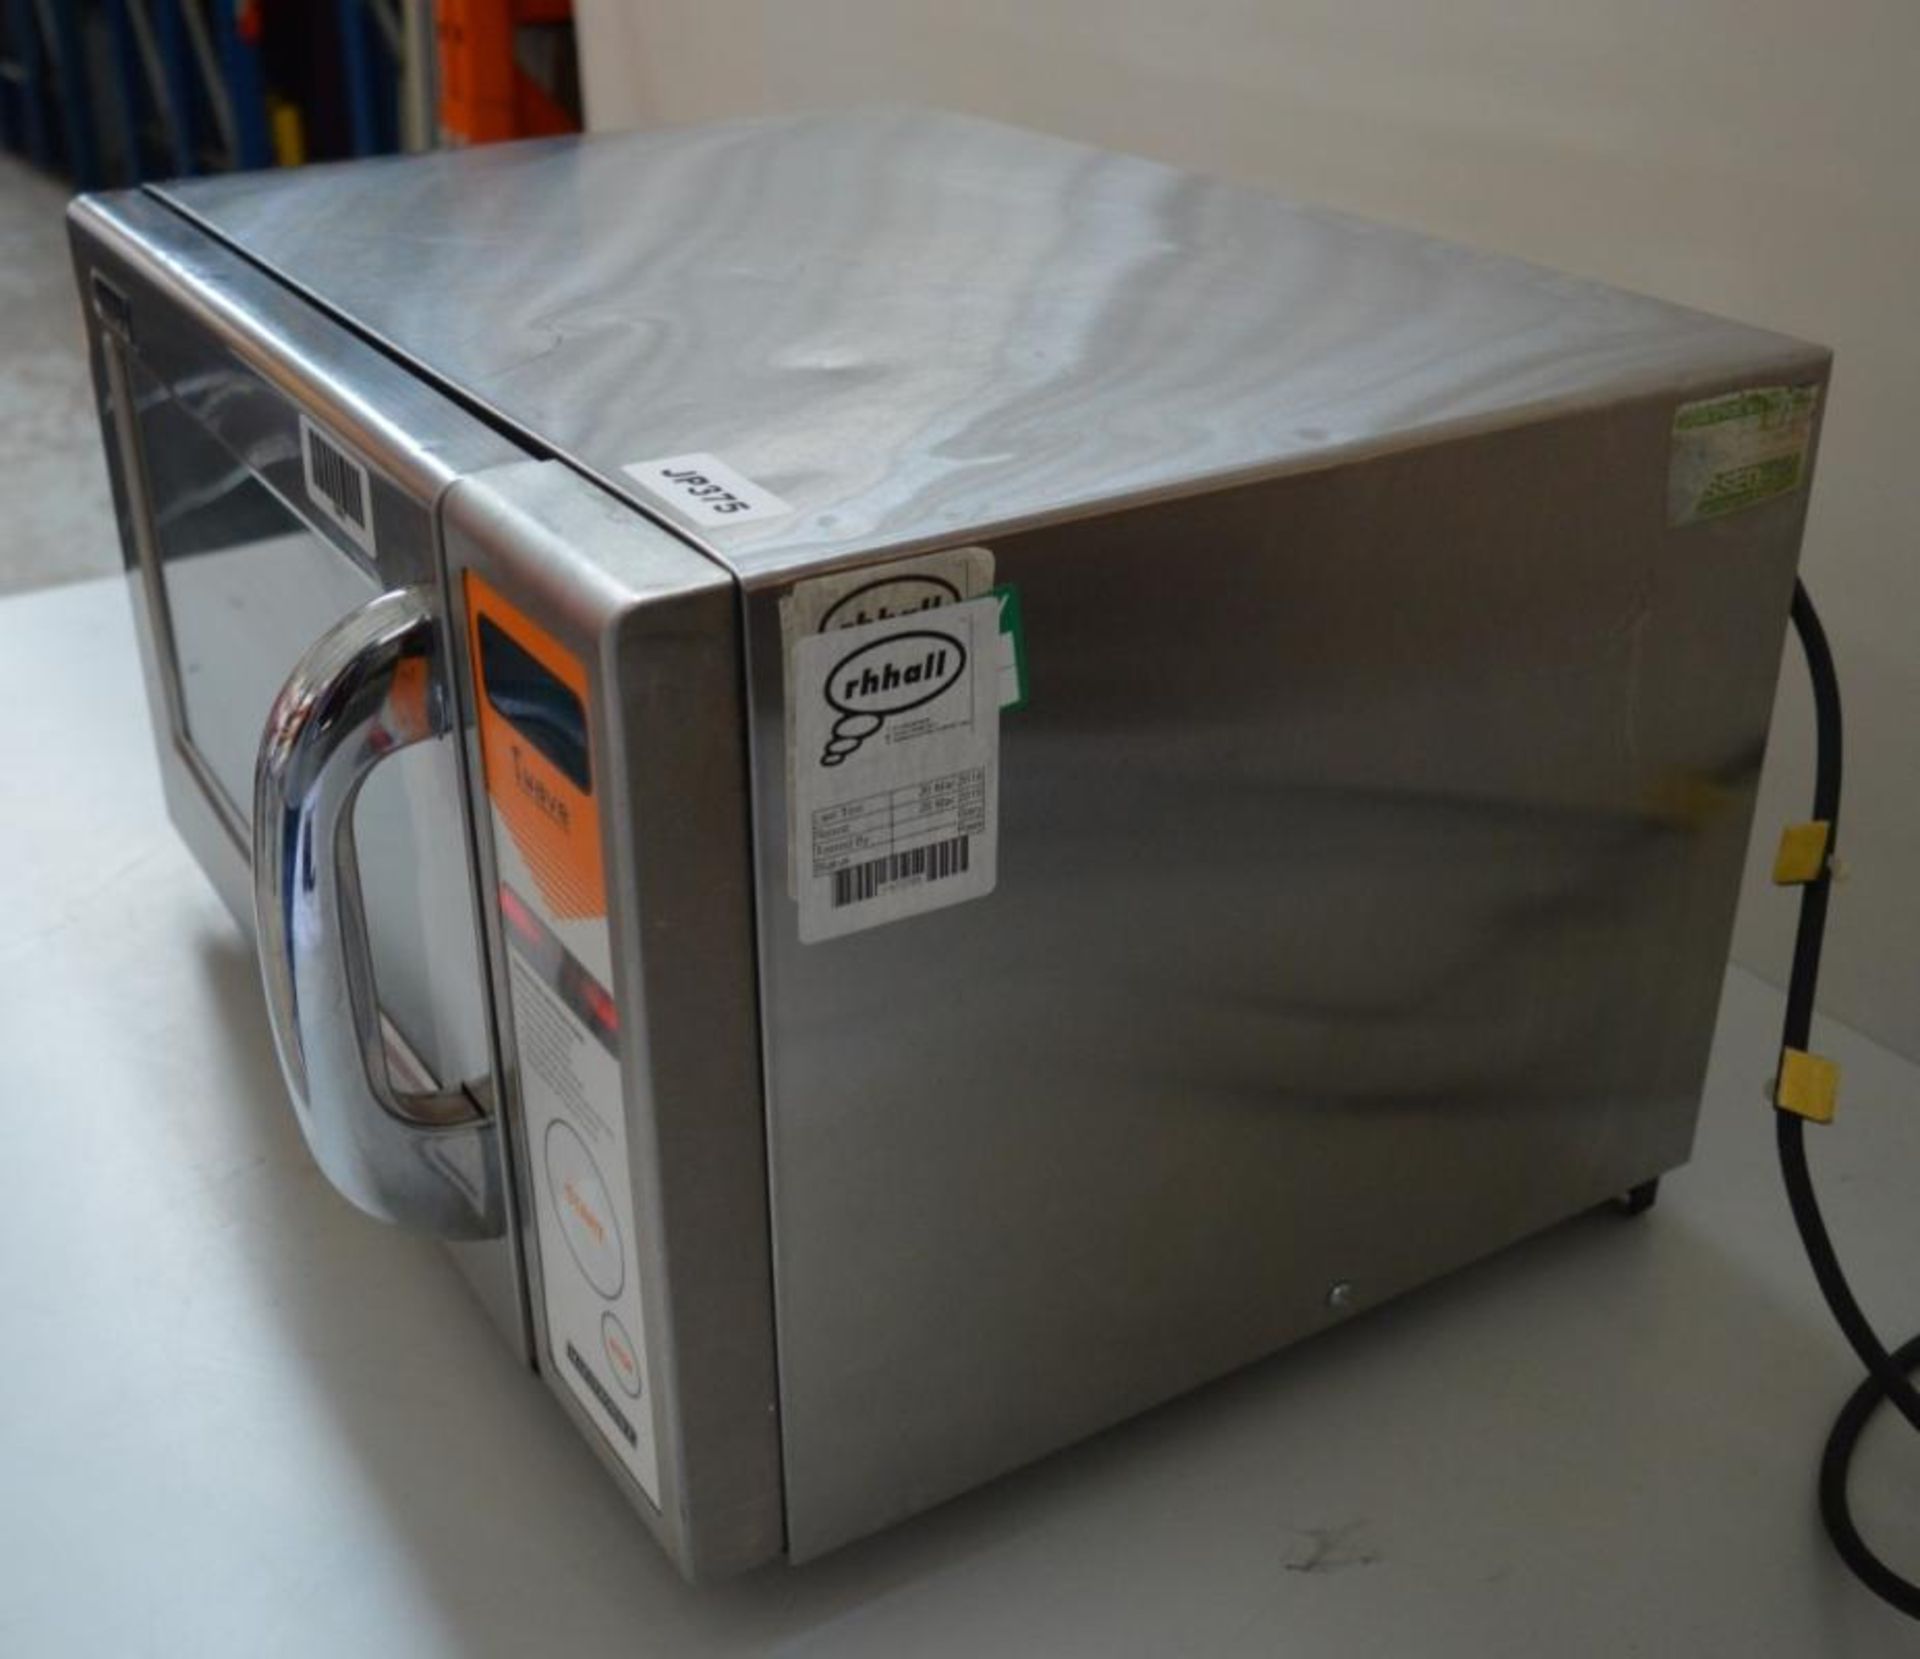 1 x iWave MiWAVE1000 Automated Foodservice Solution - Stainless Steel 1000w Catering Microwave - Image 8 of 14